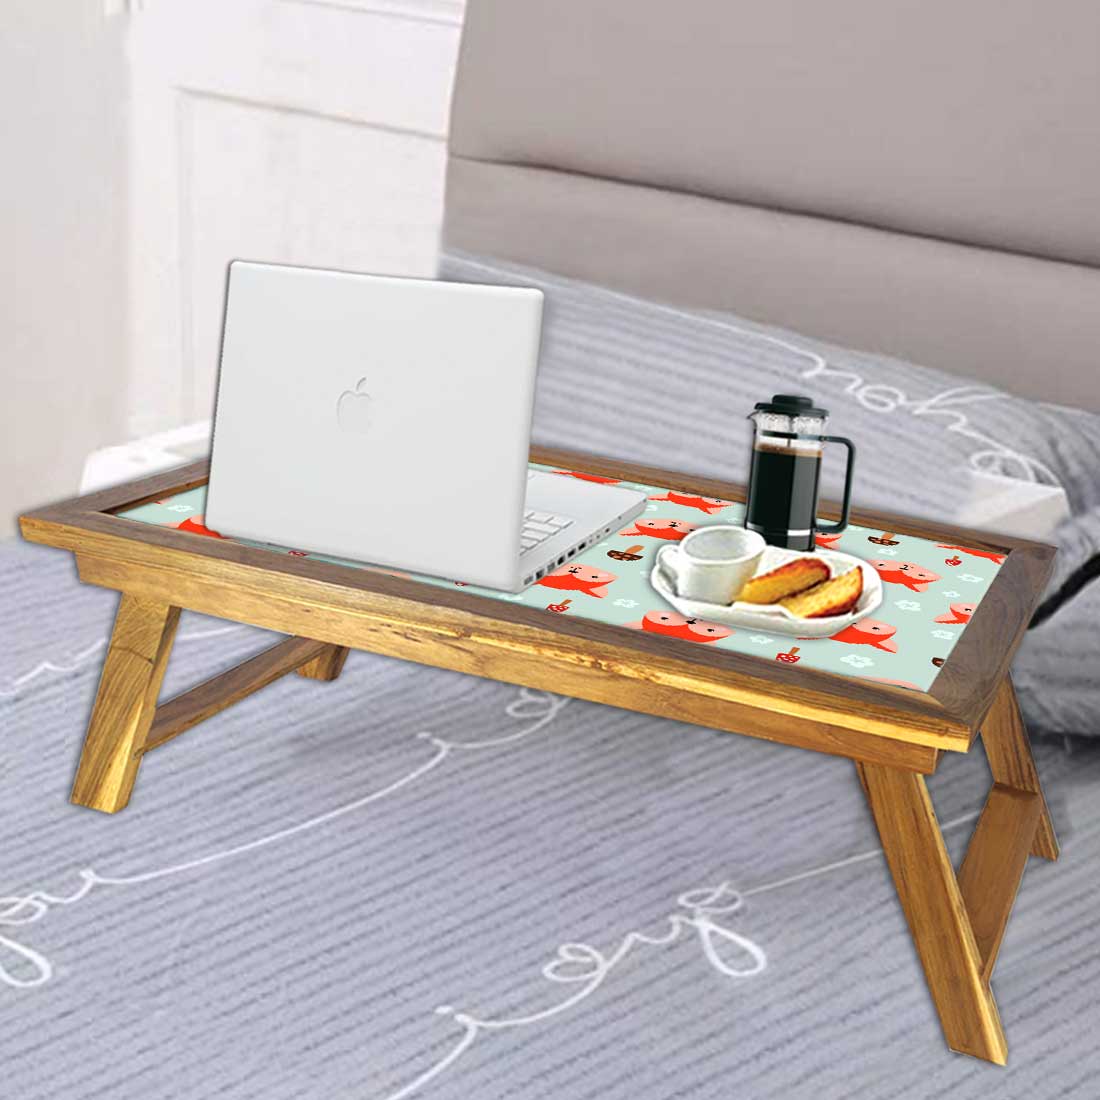 Modern Foldable Laptop Stand for Bed Breakfast Table Study Desk - Fox Nutcase